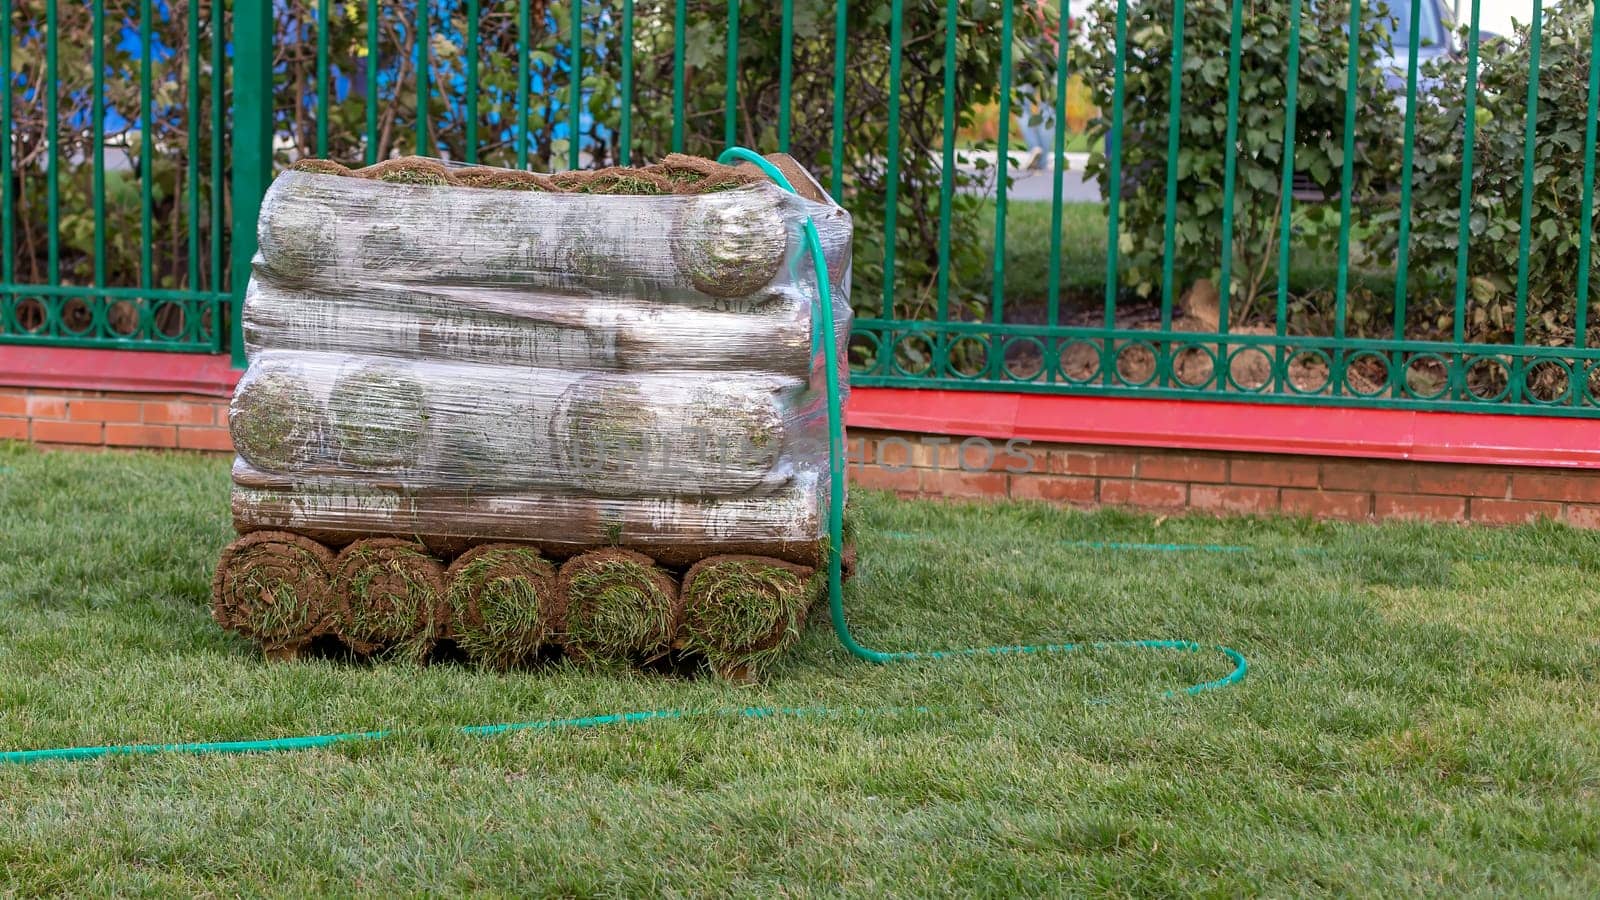 Stacked rolls of fresh sod ready for laying out on a landscaped lawn, with a garden hose nearby by Zakharova